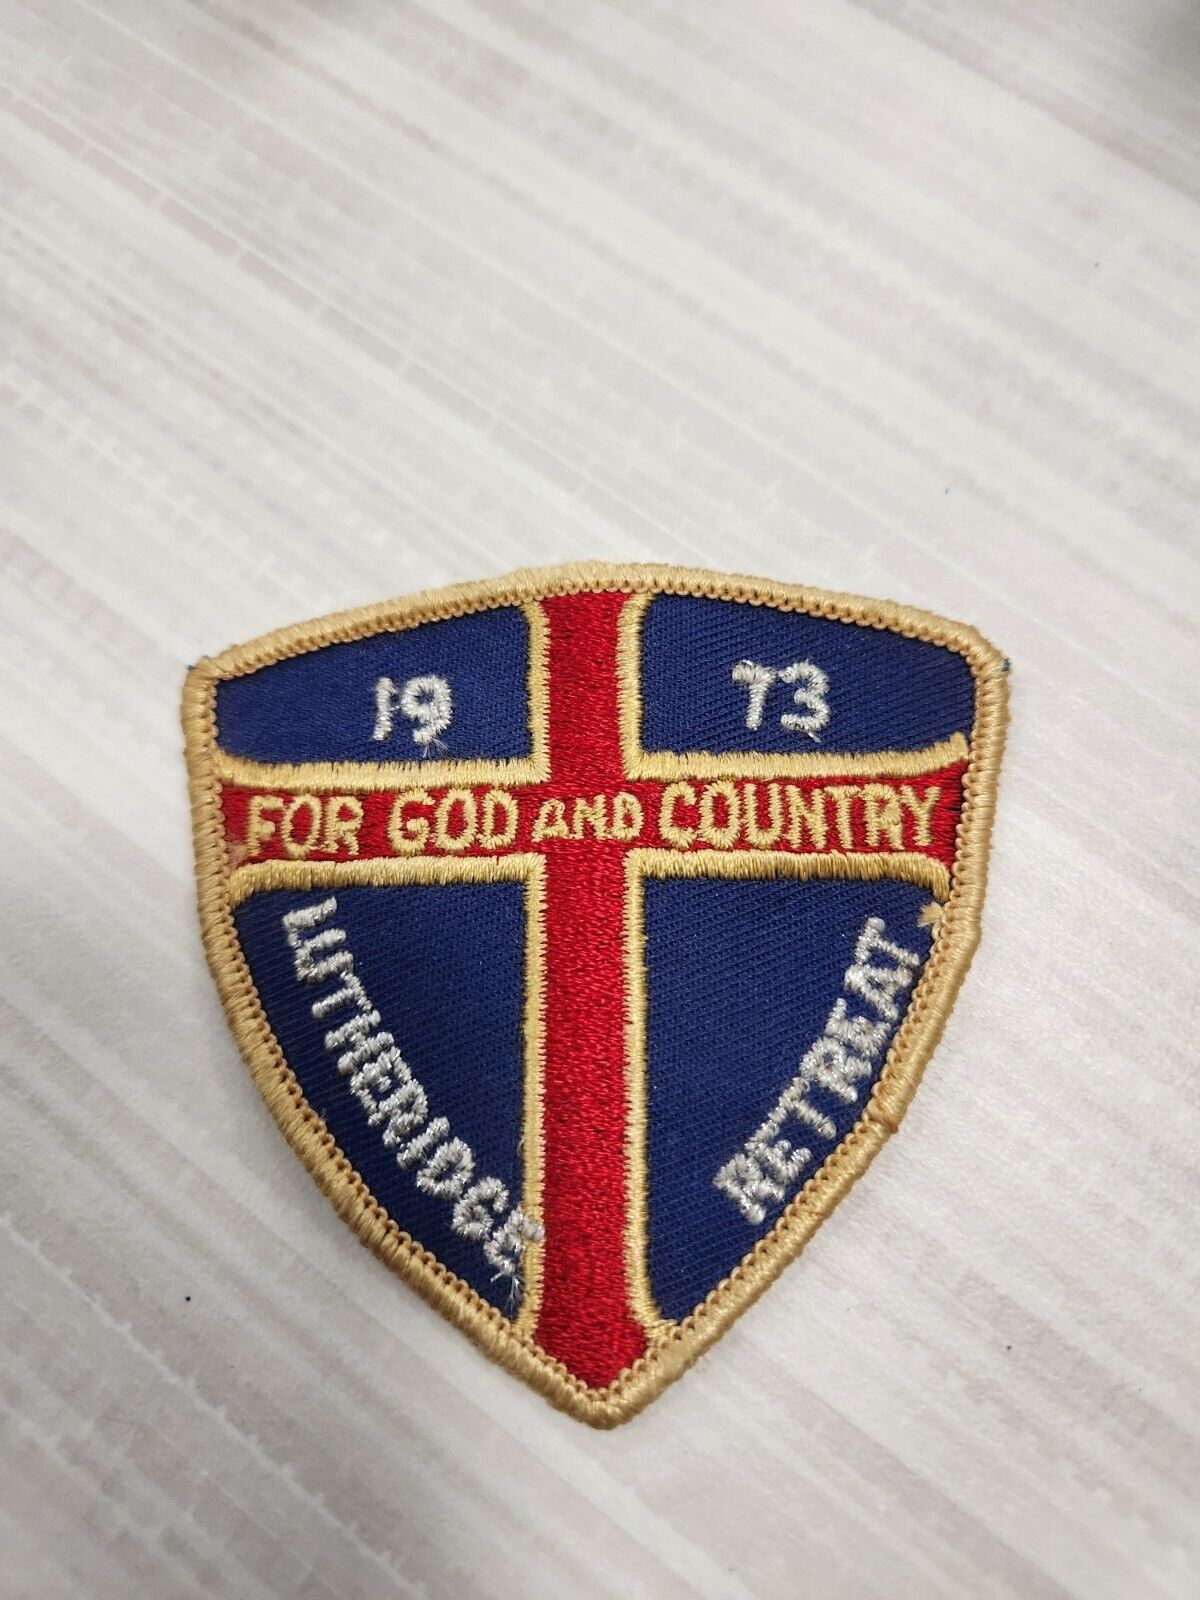 BSA 1973 For God And Country Lutheridge Retreat Embroidered Patch